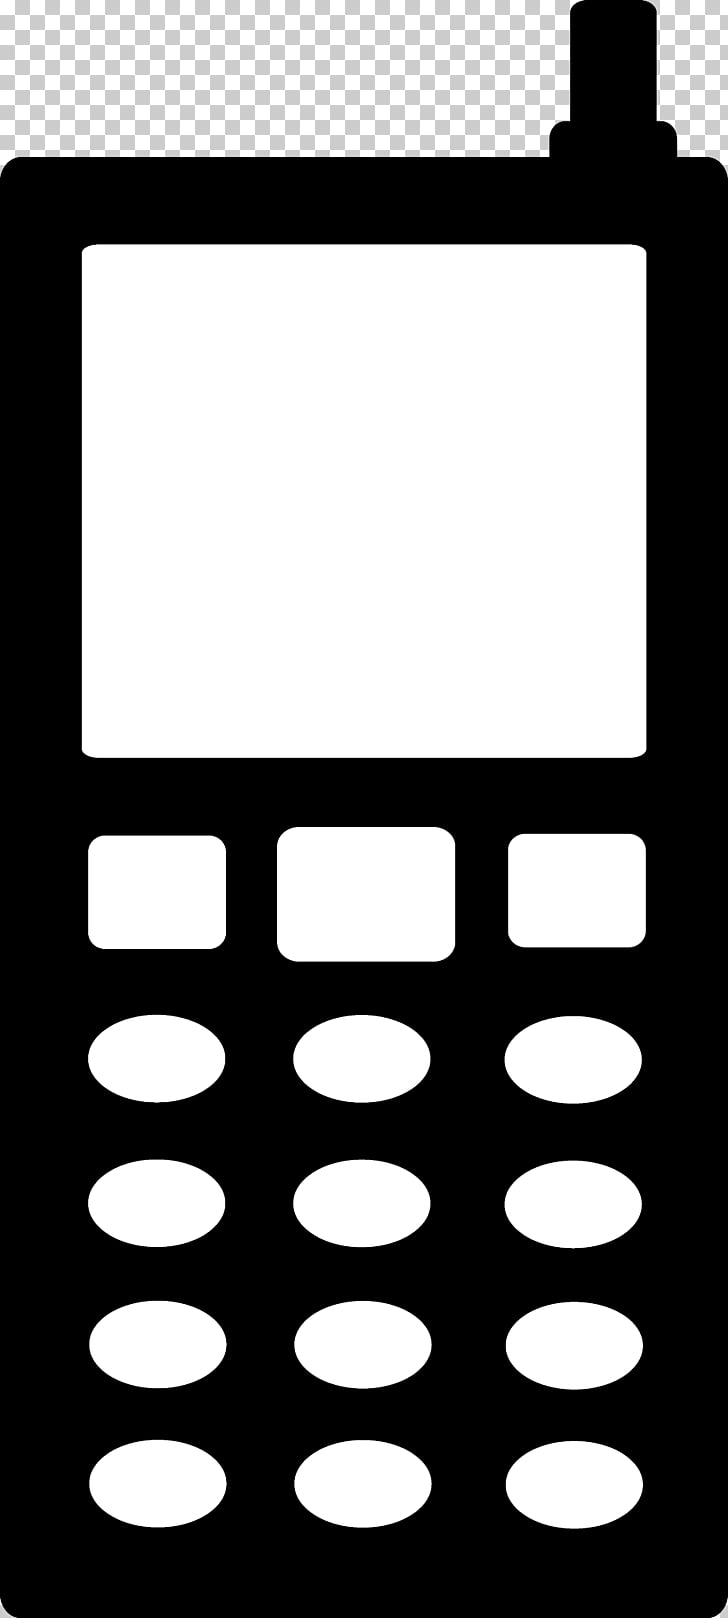 Telephone Silhouette , No Cell Phone PNG clipart